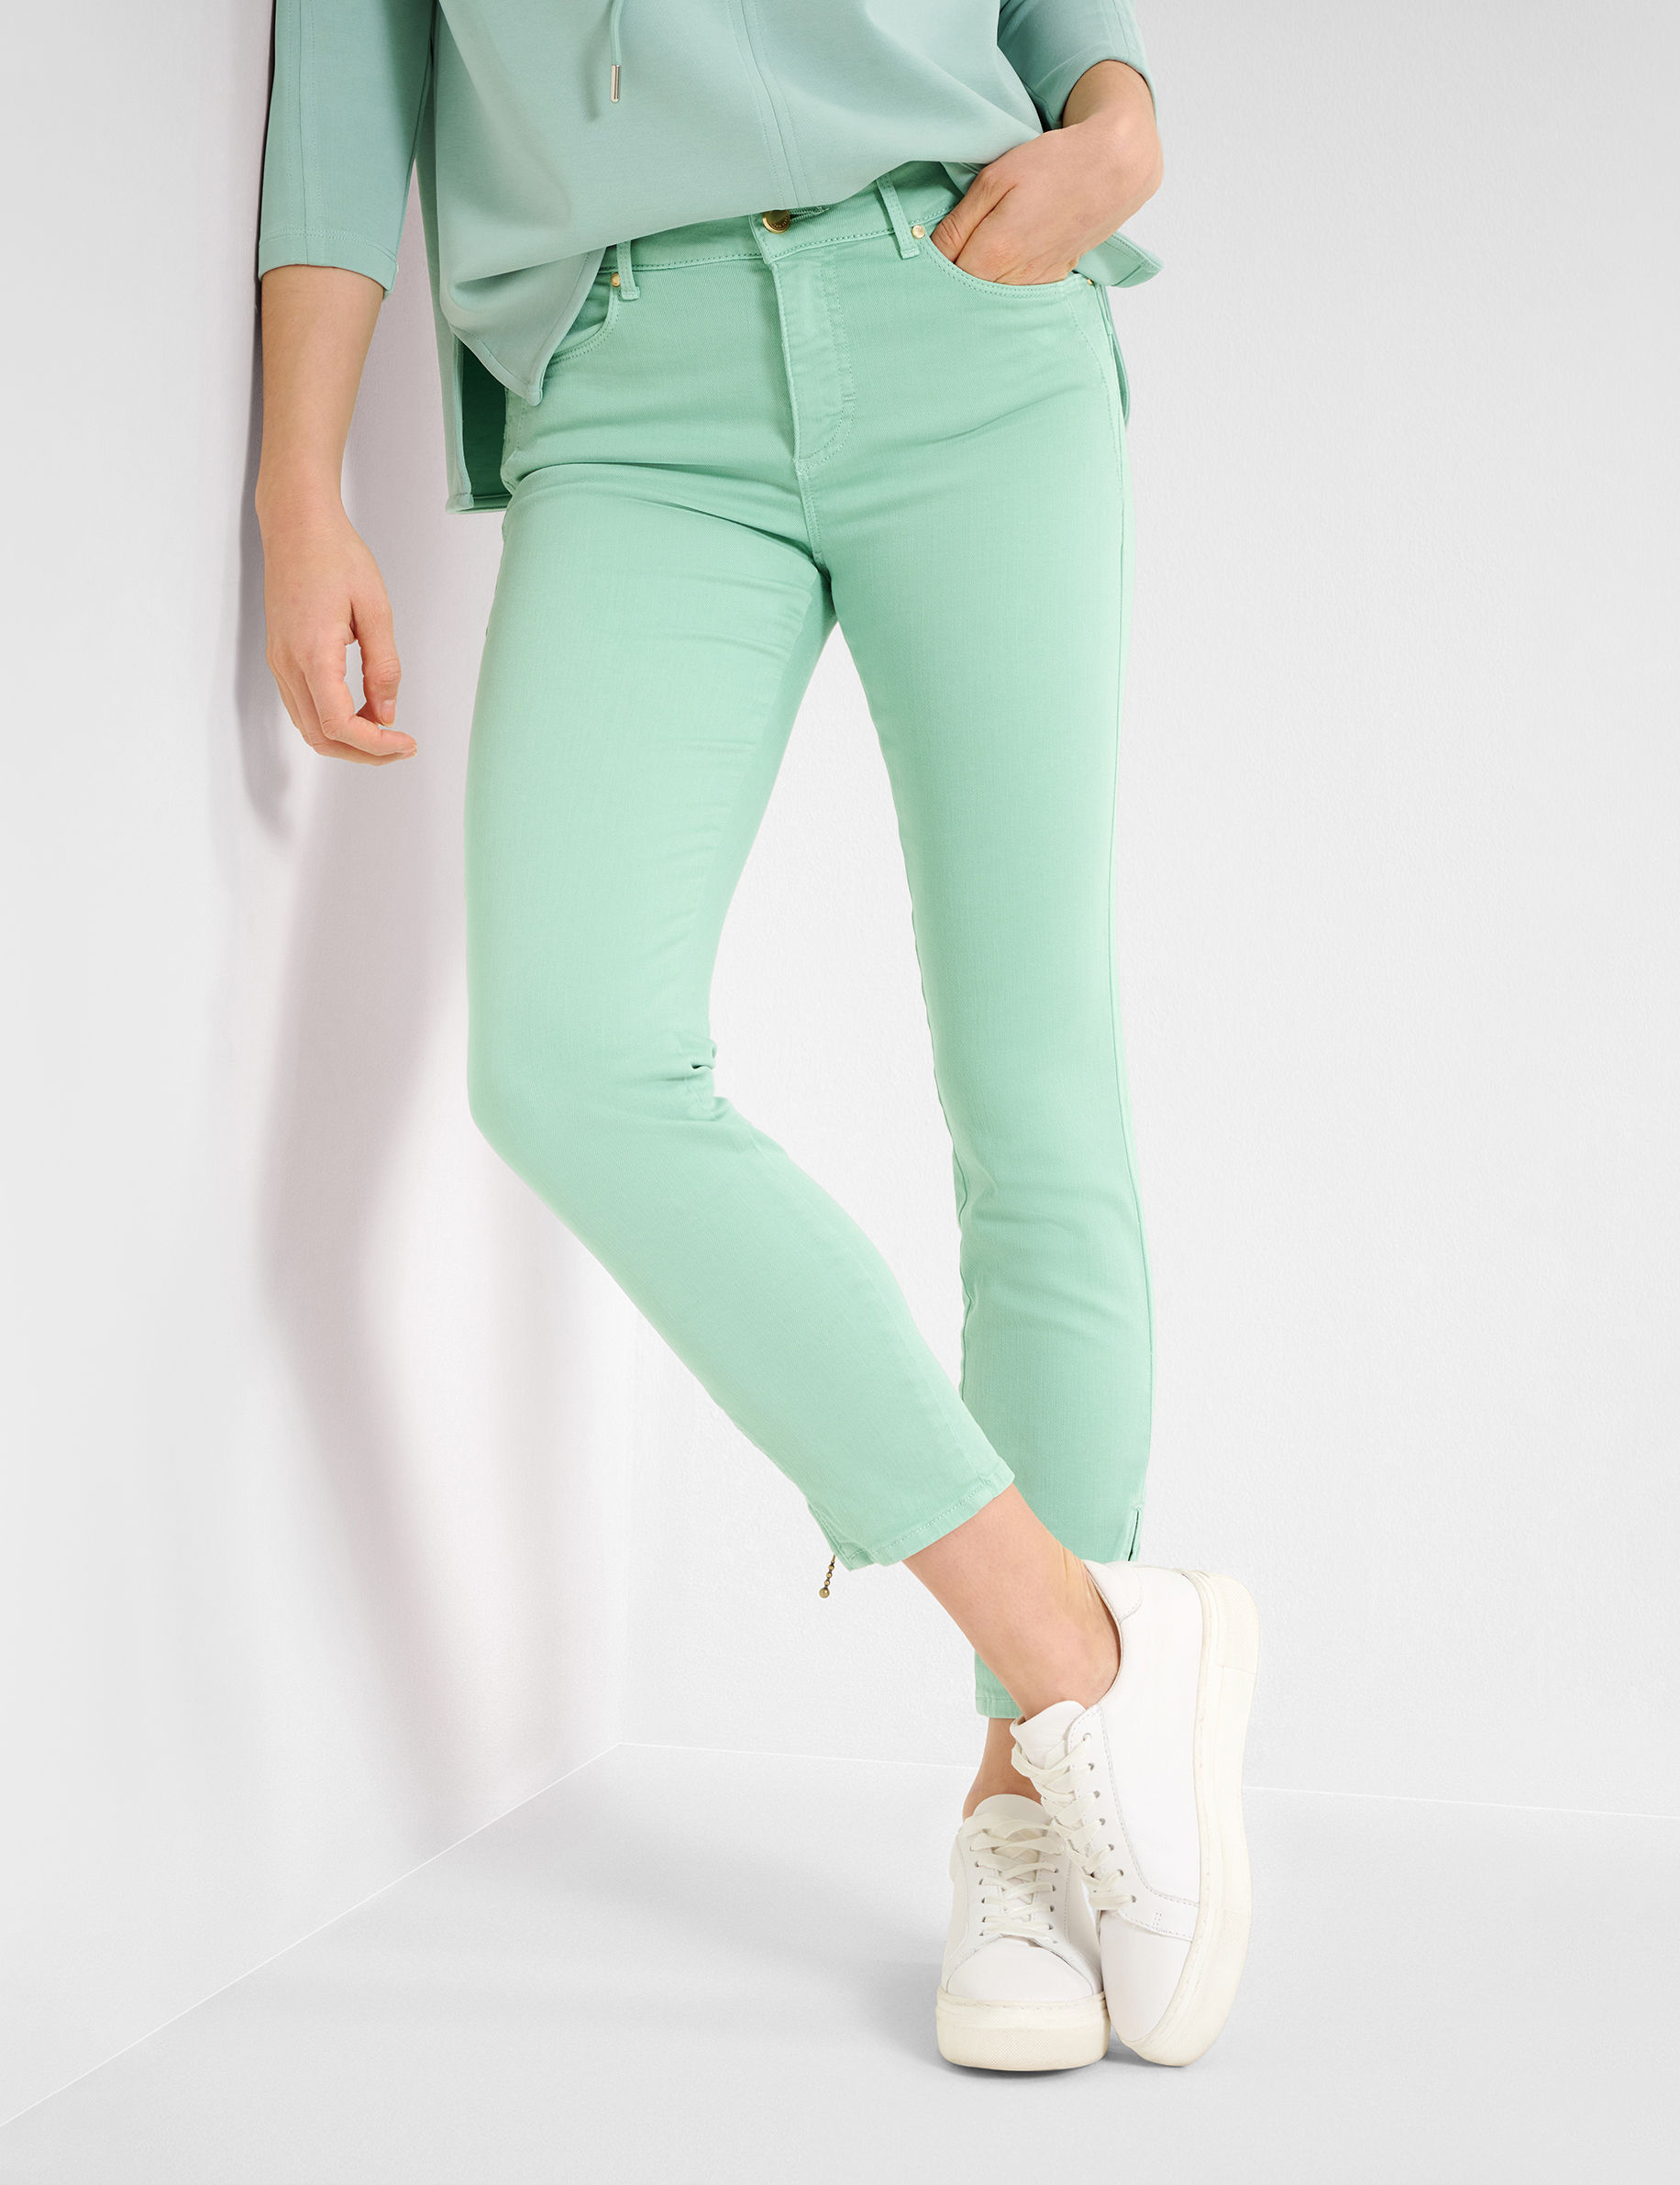 Shades of green, Women, SKINNY, Style ANA S, MODEL_FRONT_ISHOP